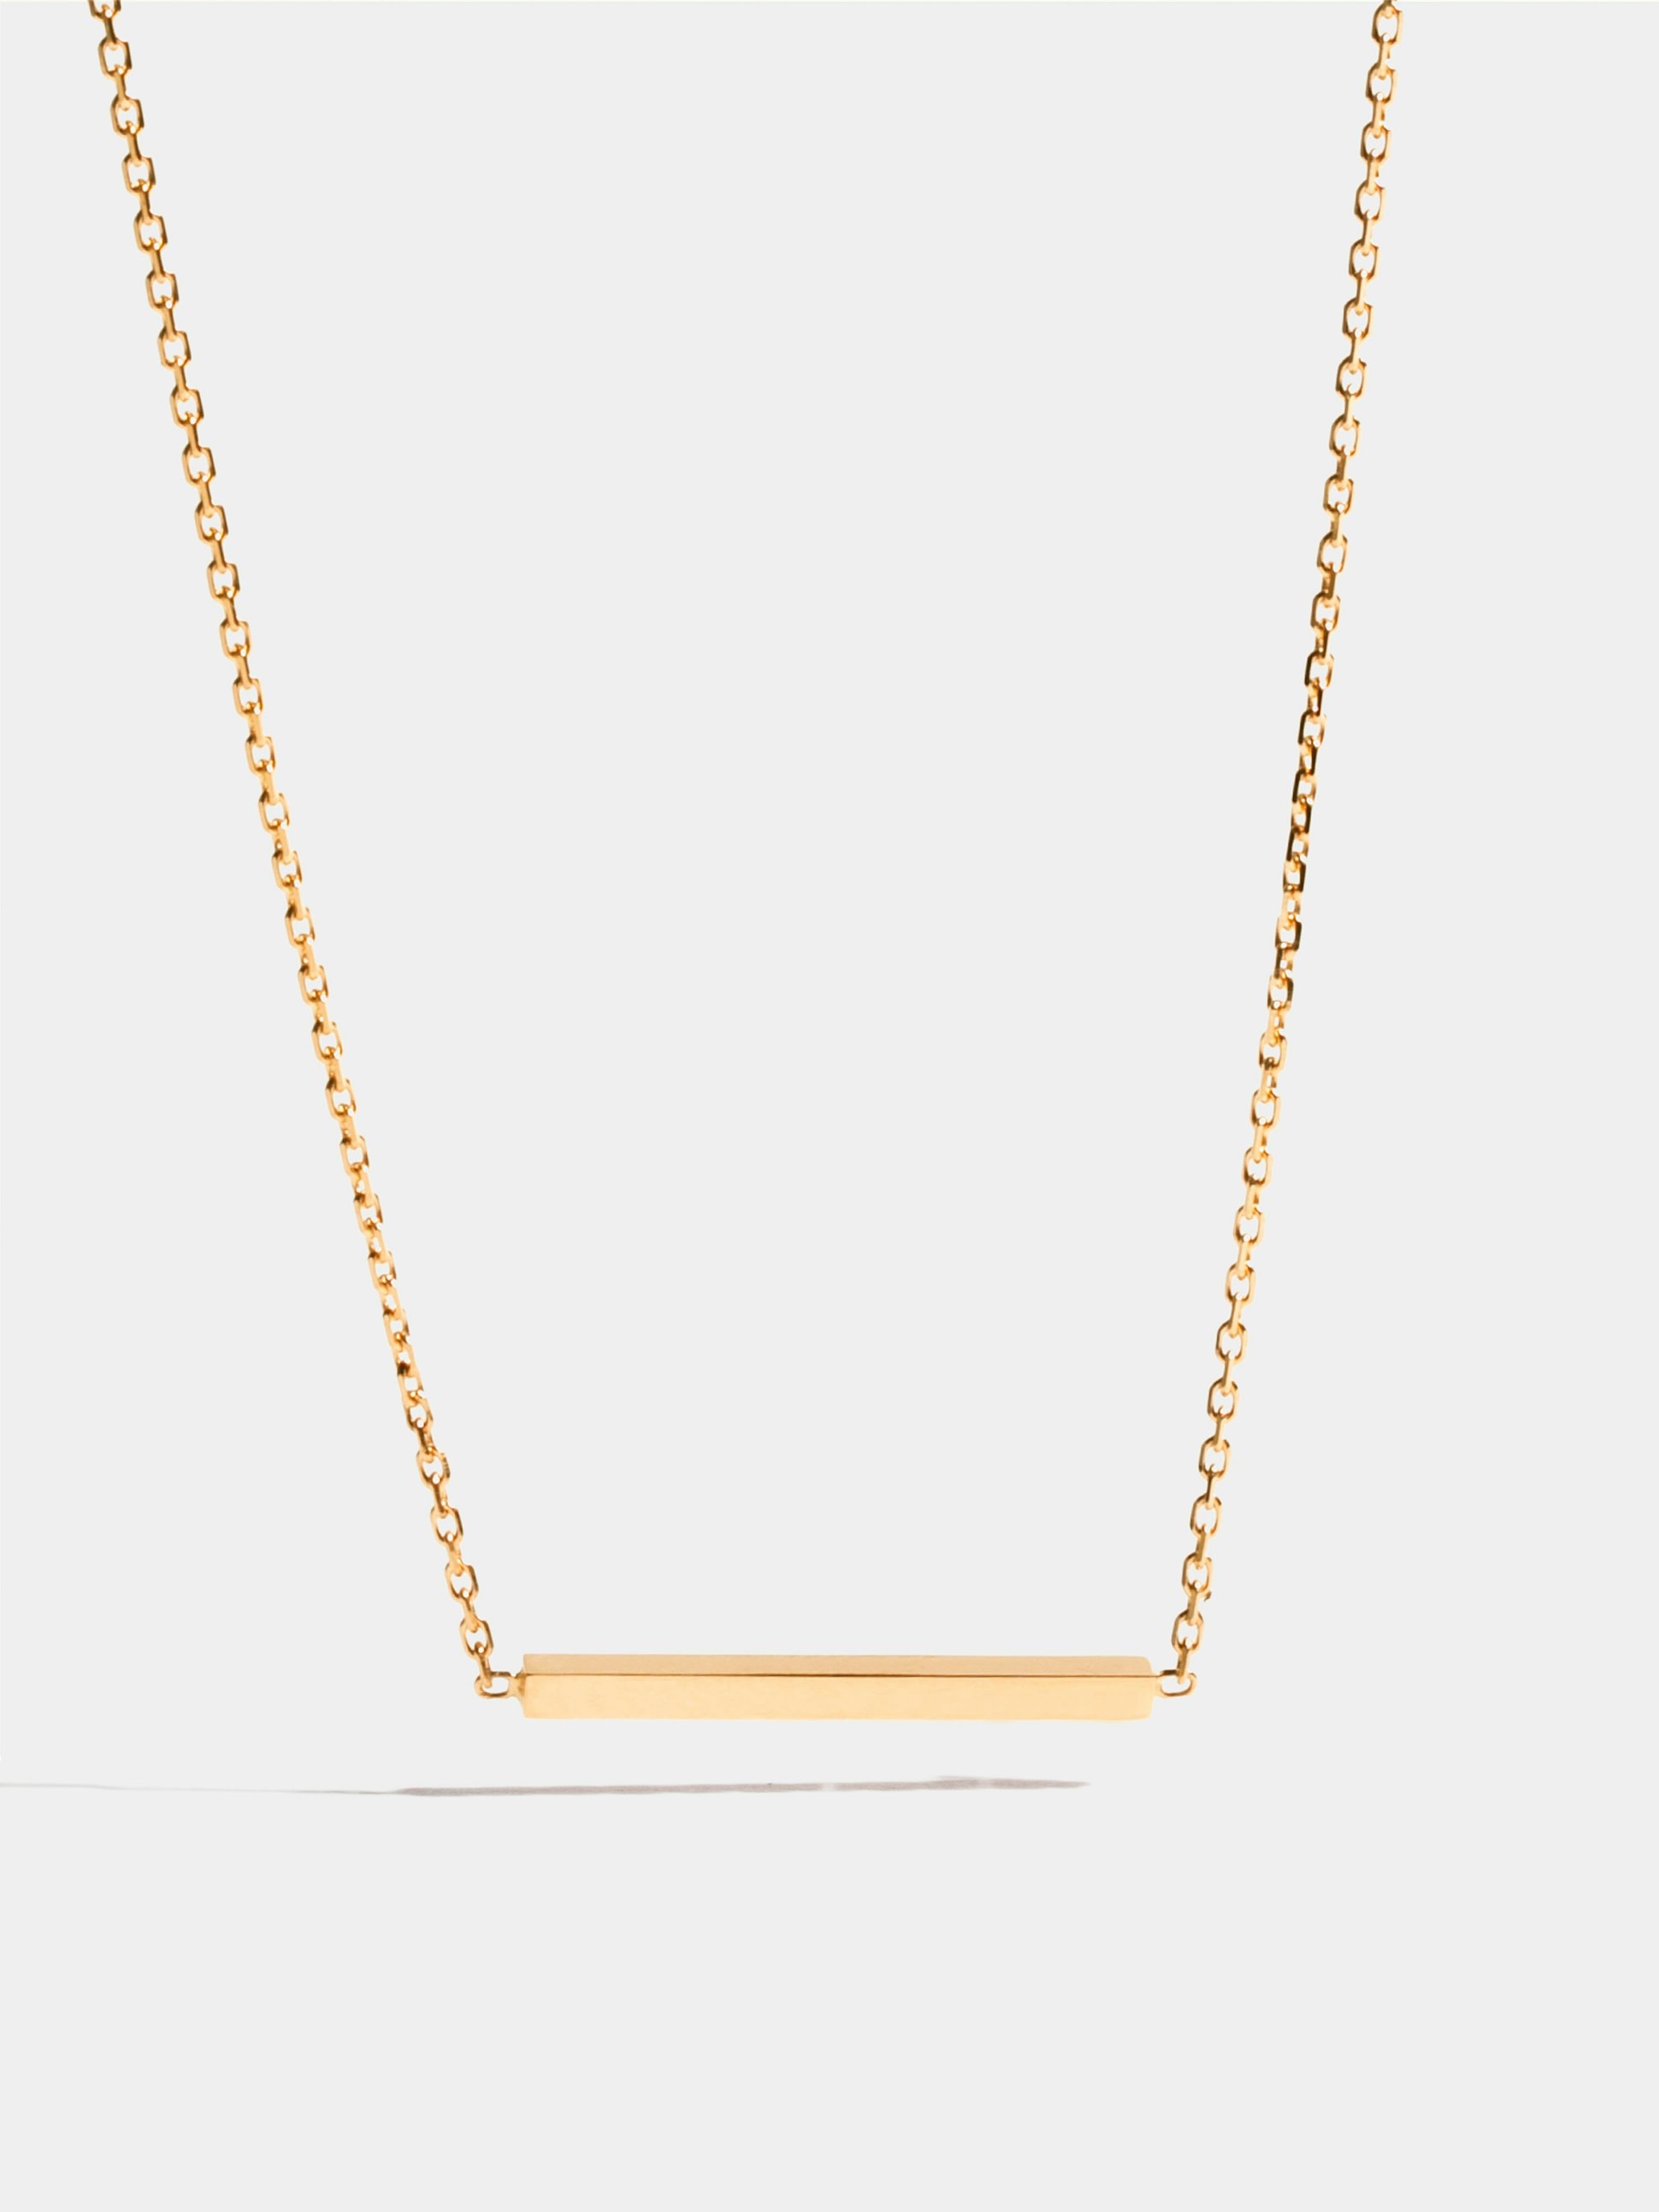 Anagramme polished motif in yellow gold 18k Fairmined ethical, on 42 cm chain